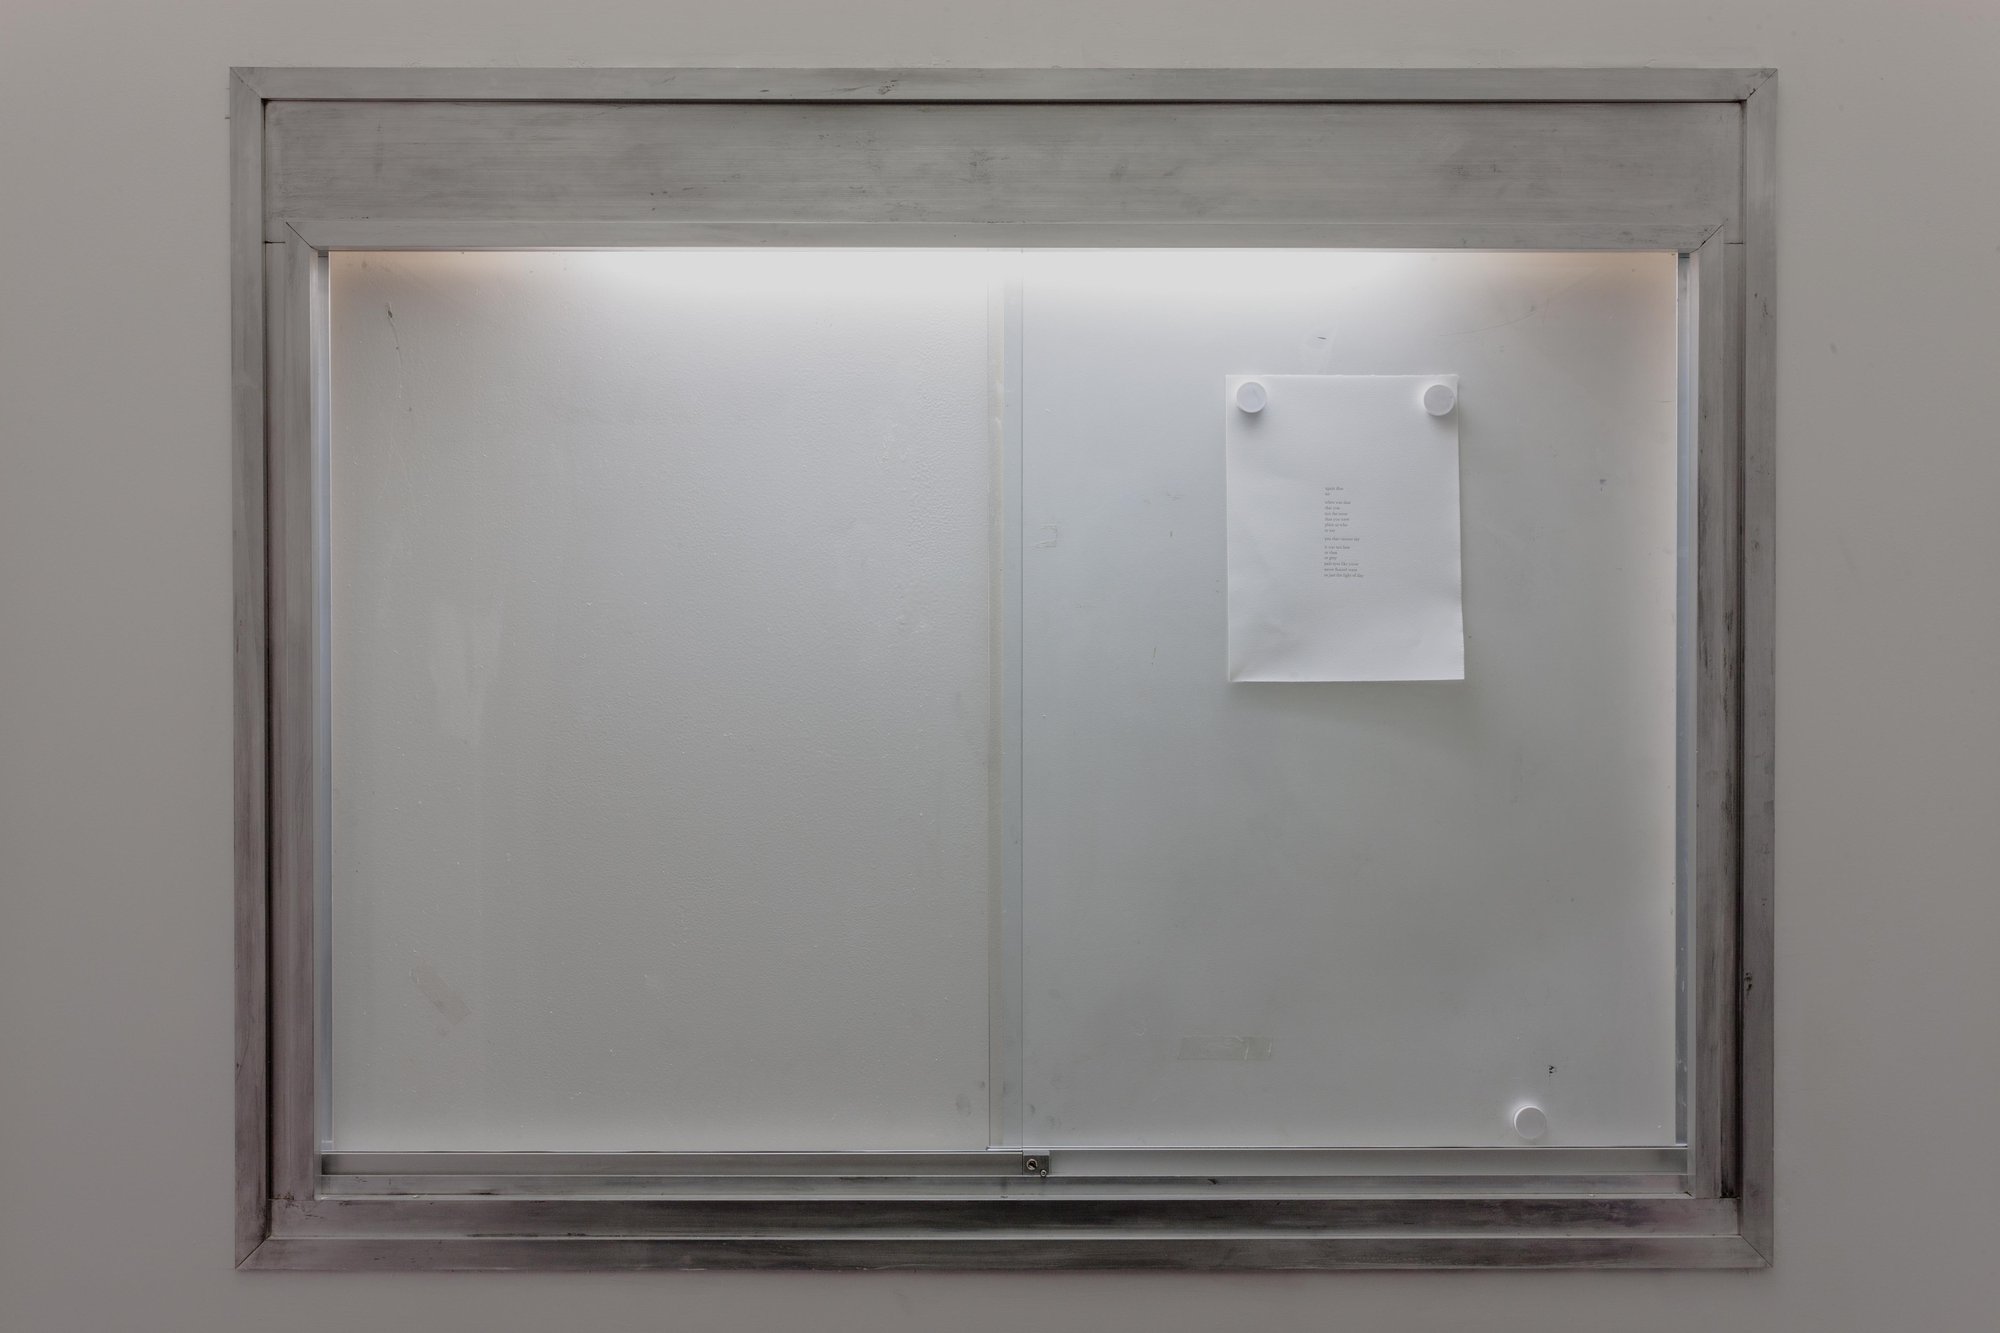 Duncan Campbell, Untitled, found metal vitrine and poem, 123.3 x 158.4 cm (48 1/2 x 62 3/8 in), 2015